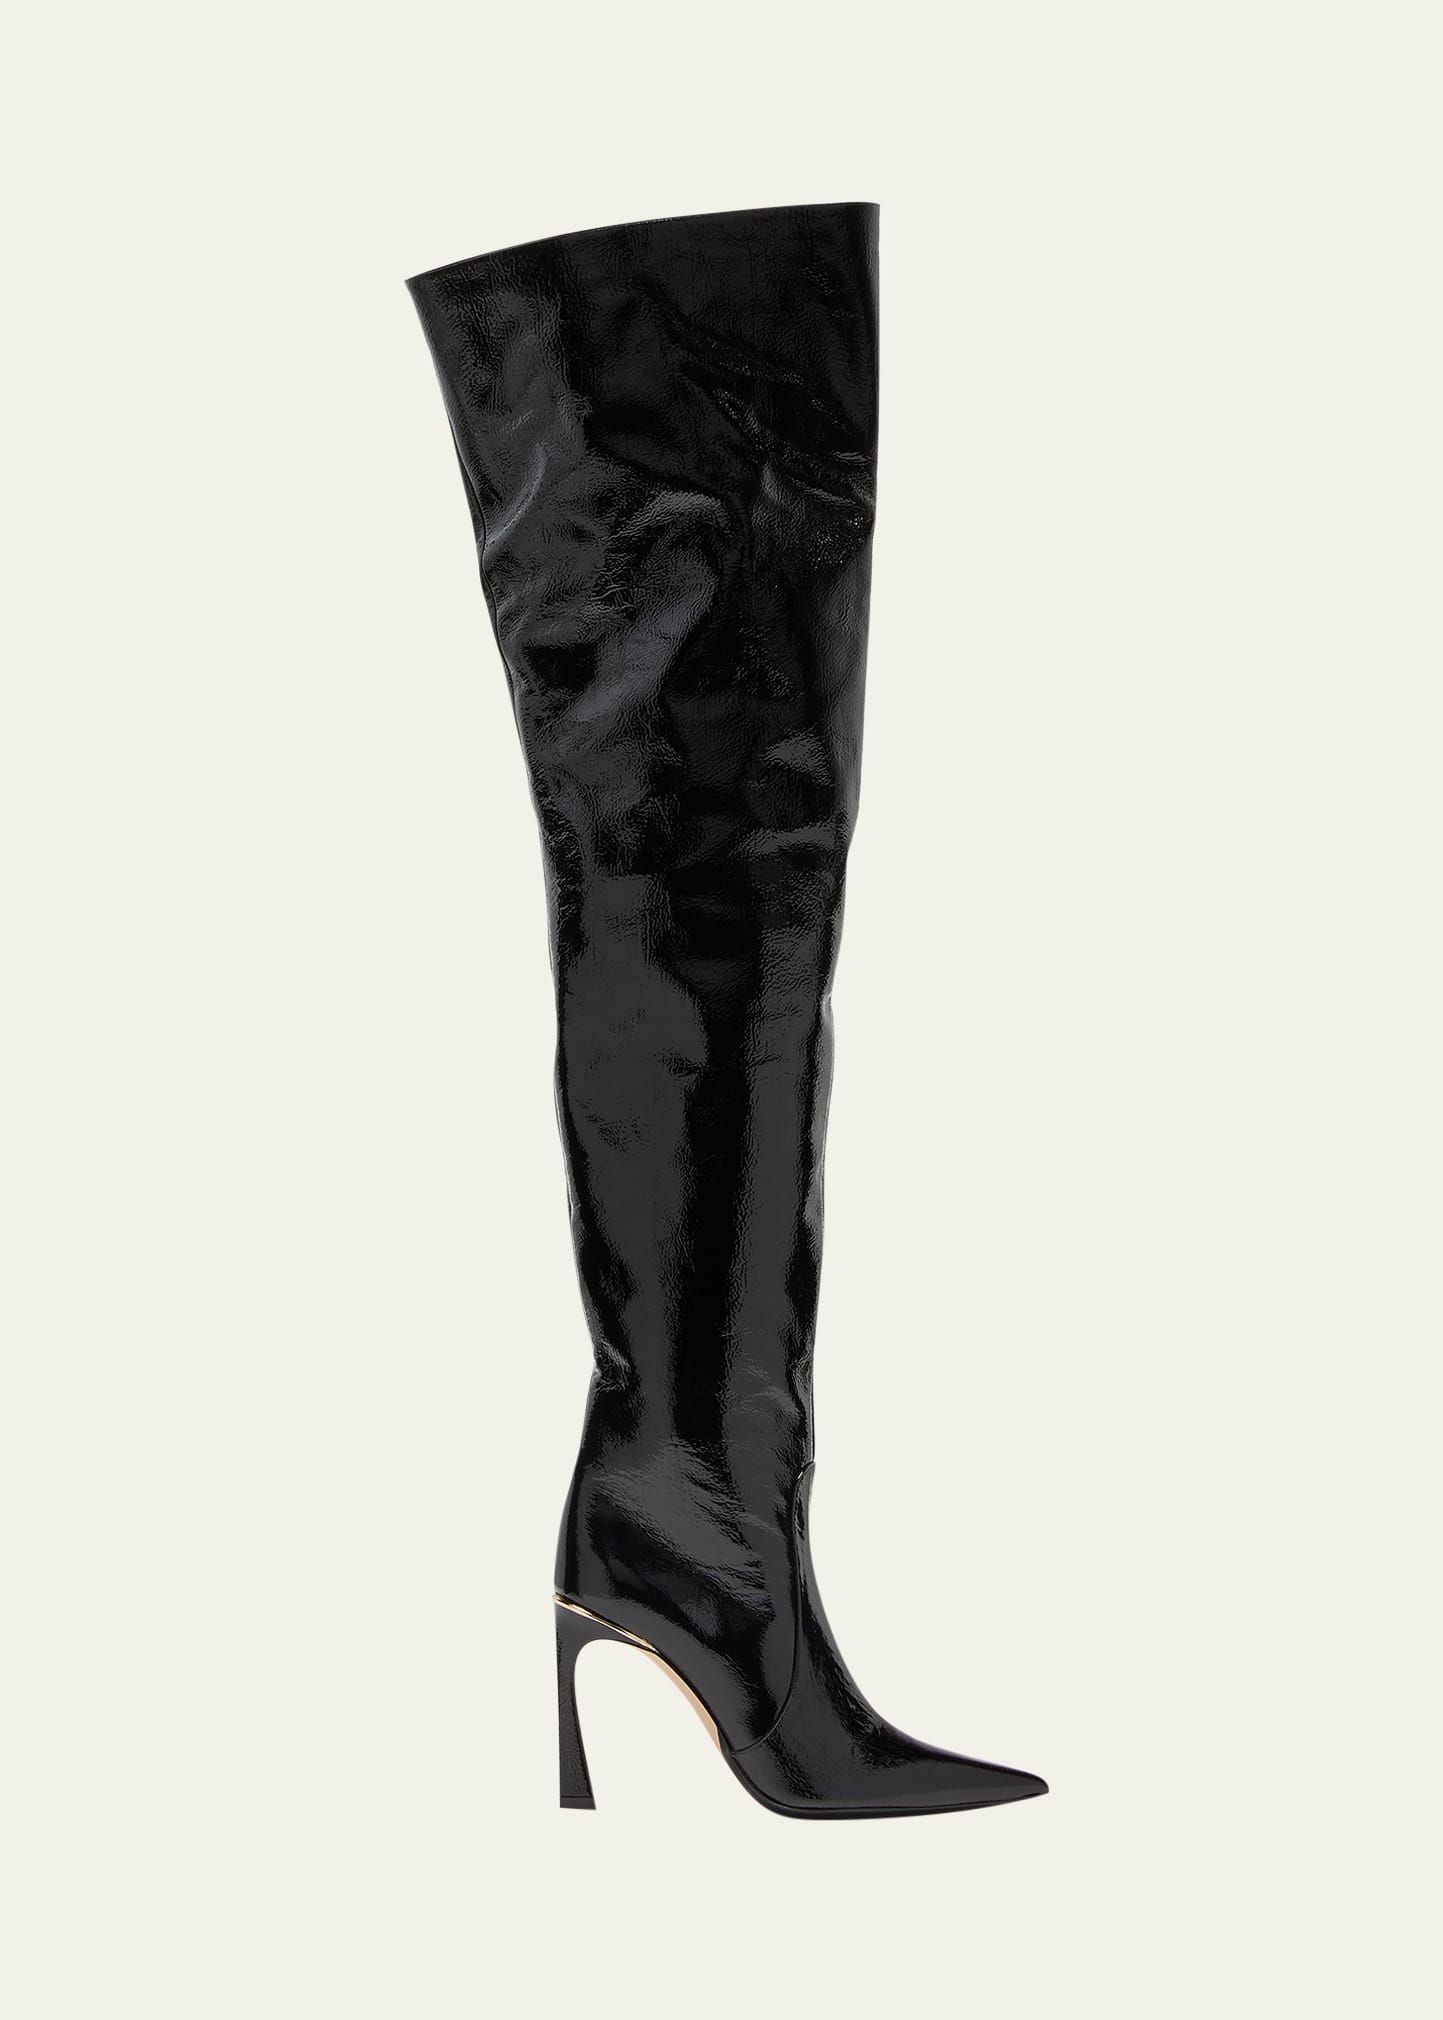 Victoria Beckham Patent Leather Over-The-Knee Boots | Bergdorf Goodman